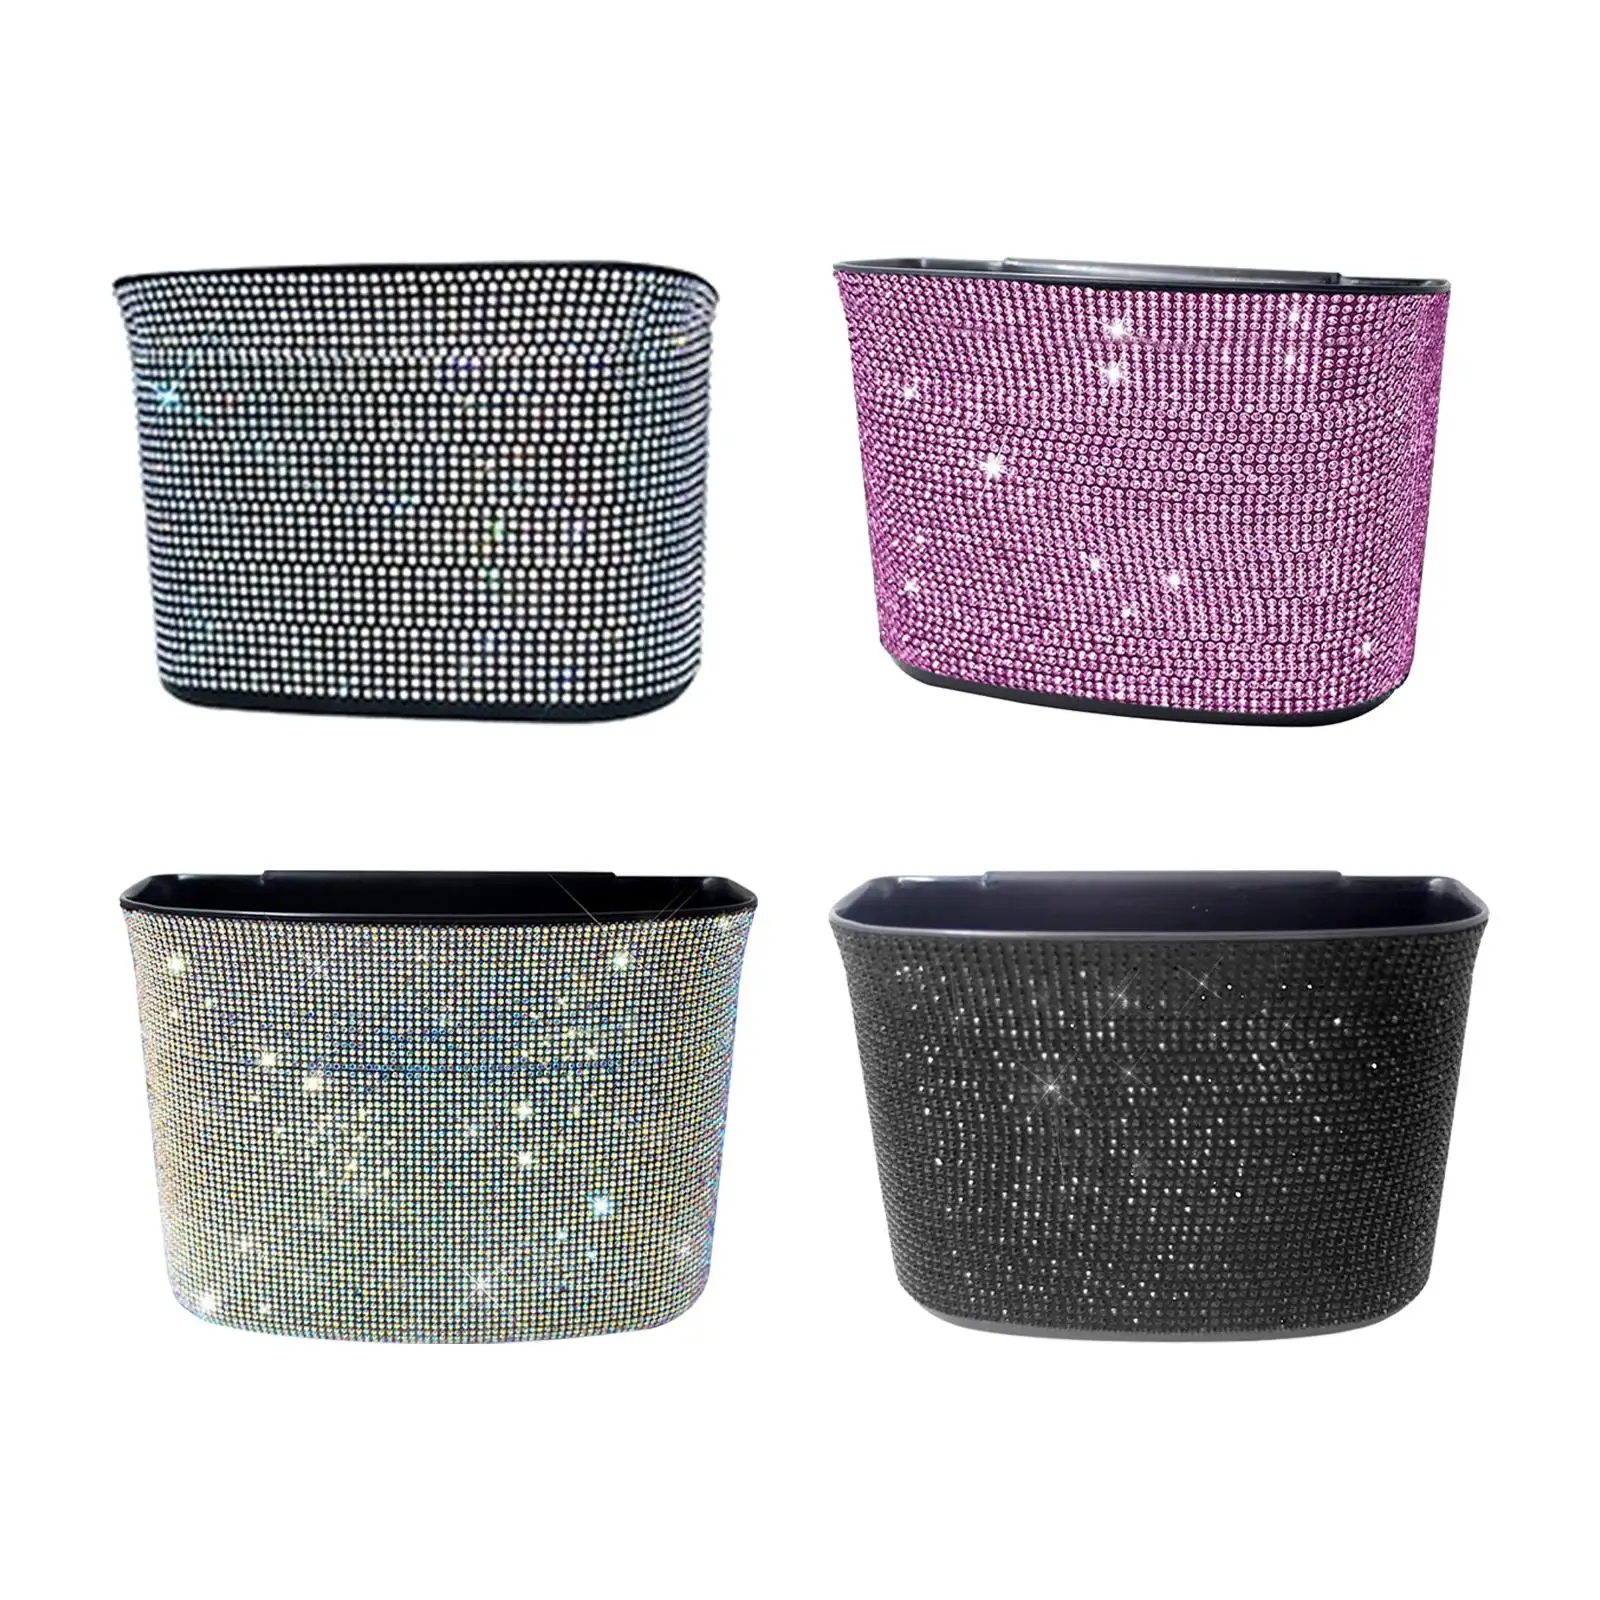 Car Trash Can Bin Back Seat Hanging Storage Container Small Crystal Multifunction Decoration Accessories Auto Garbage Bin